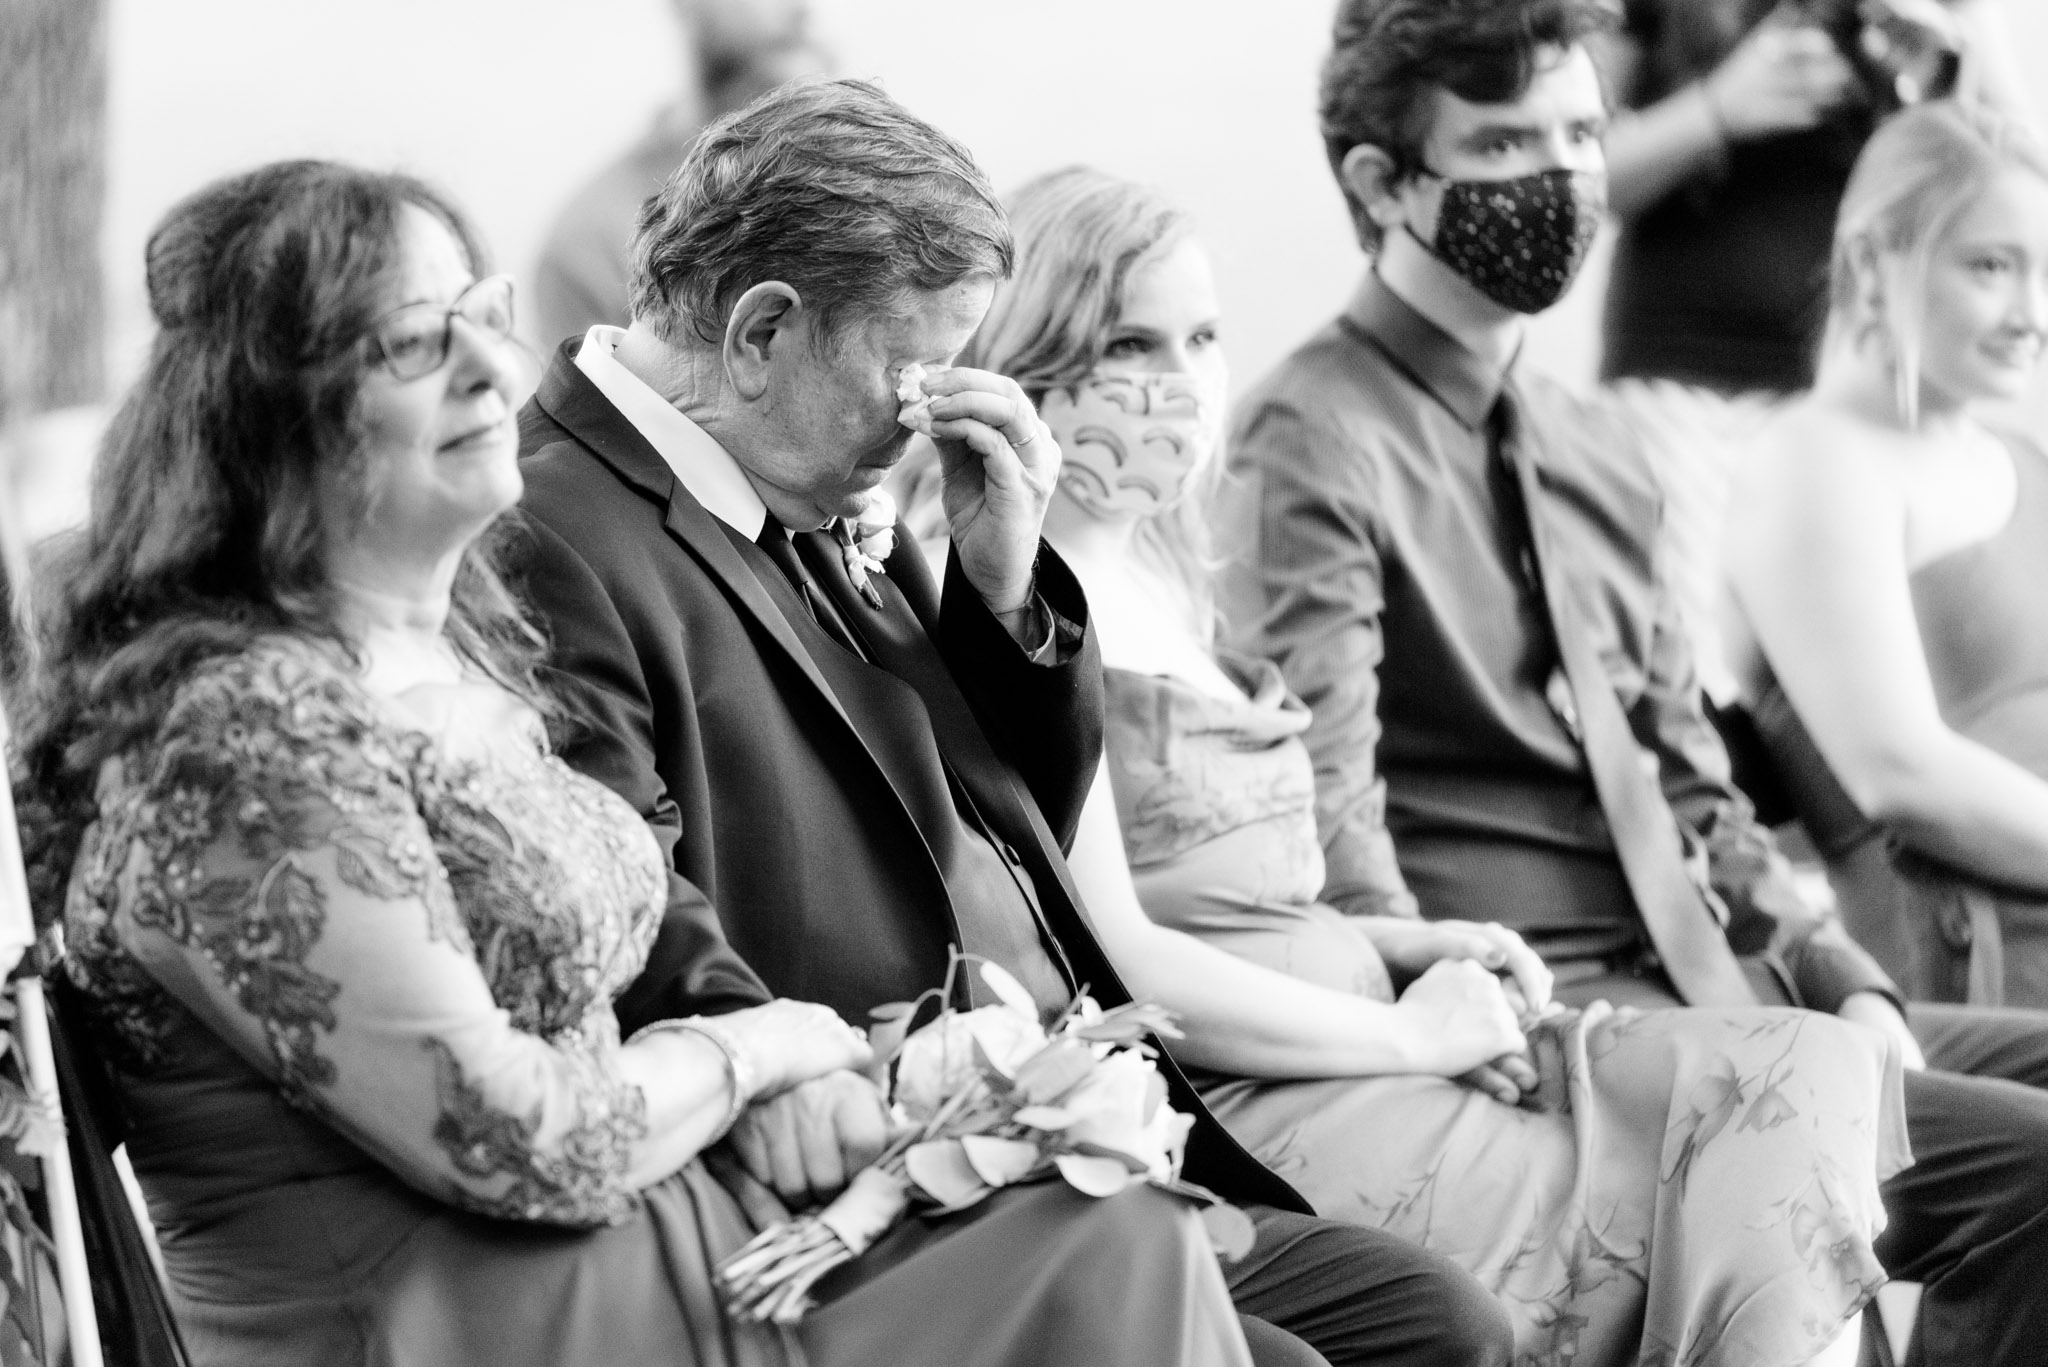 Father of the bride cries during wedding ceremony.